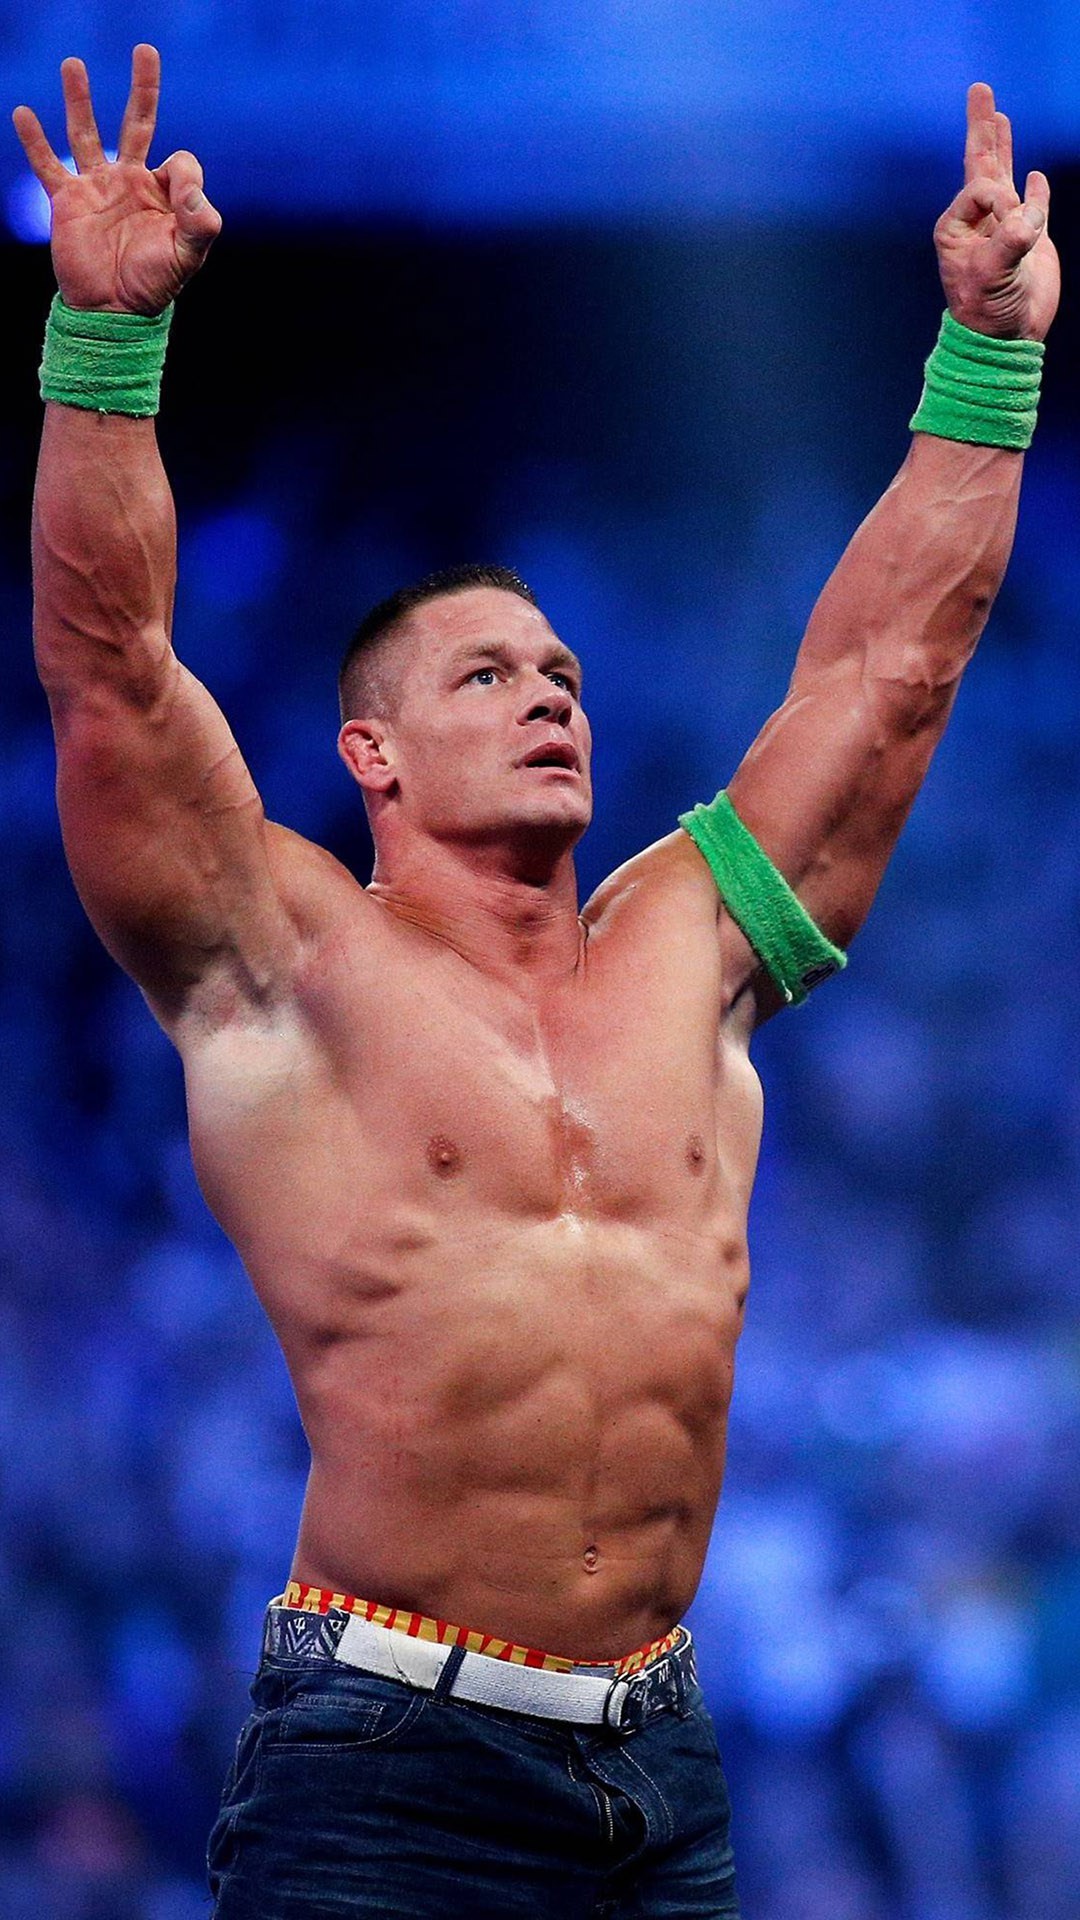 John Cena 2018 HD Wallpapers (70+ pictures)